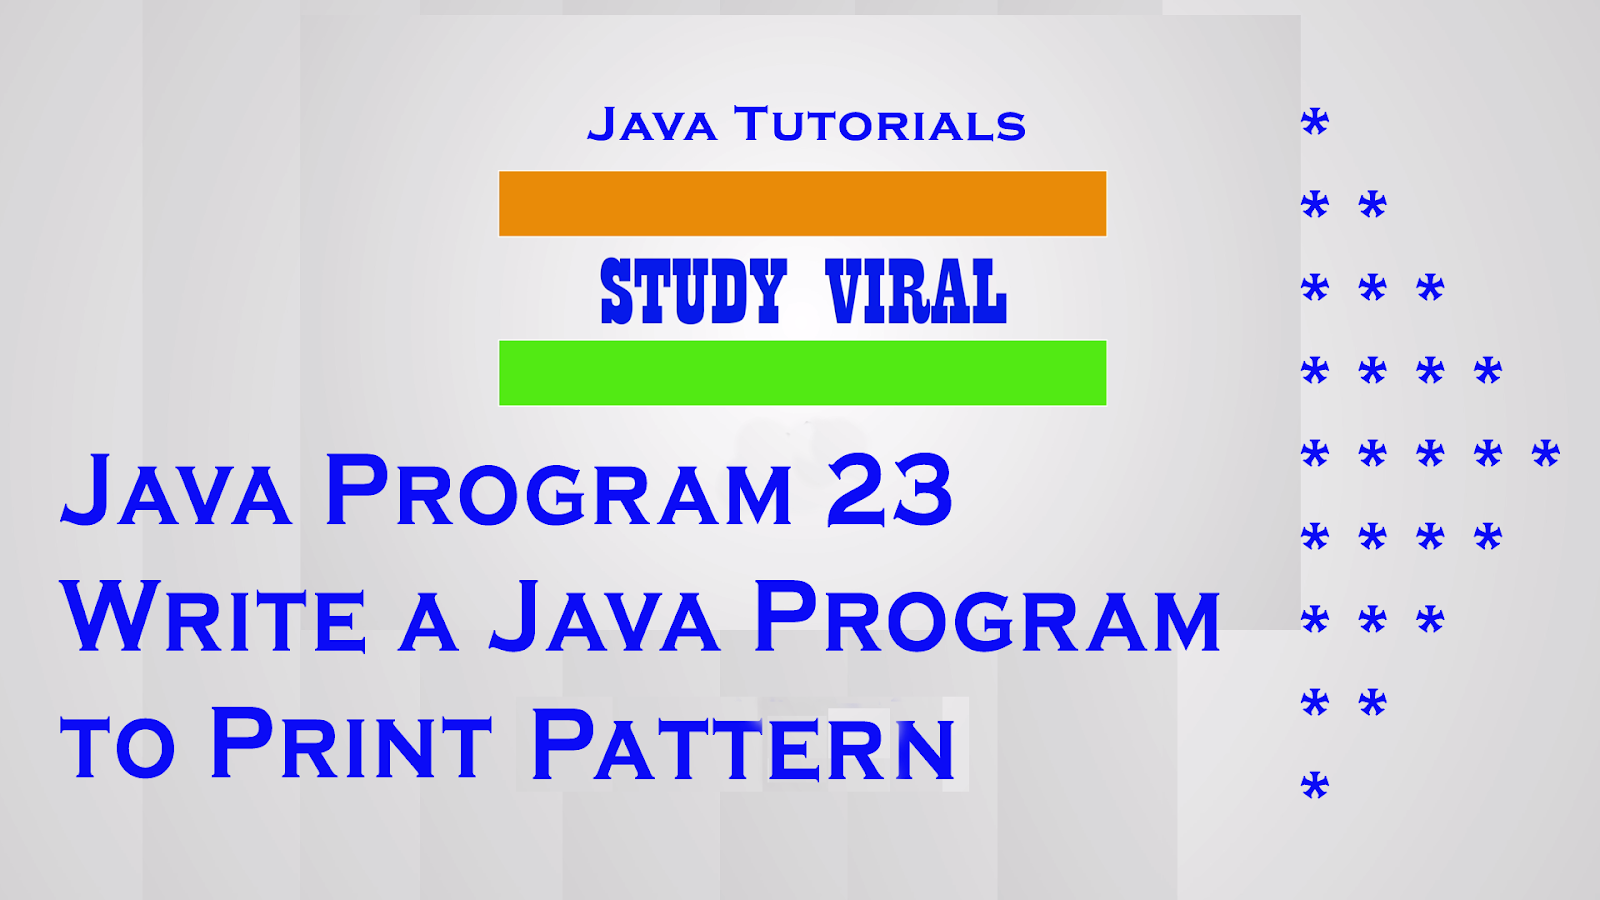 Java 23. Pattern in java. How to Print Star patterns in java. Patterns java books.